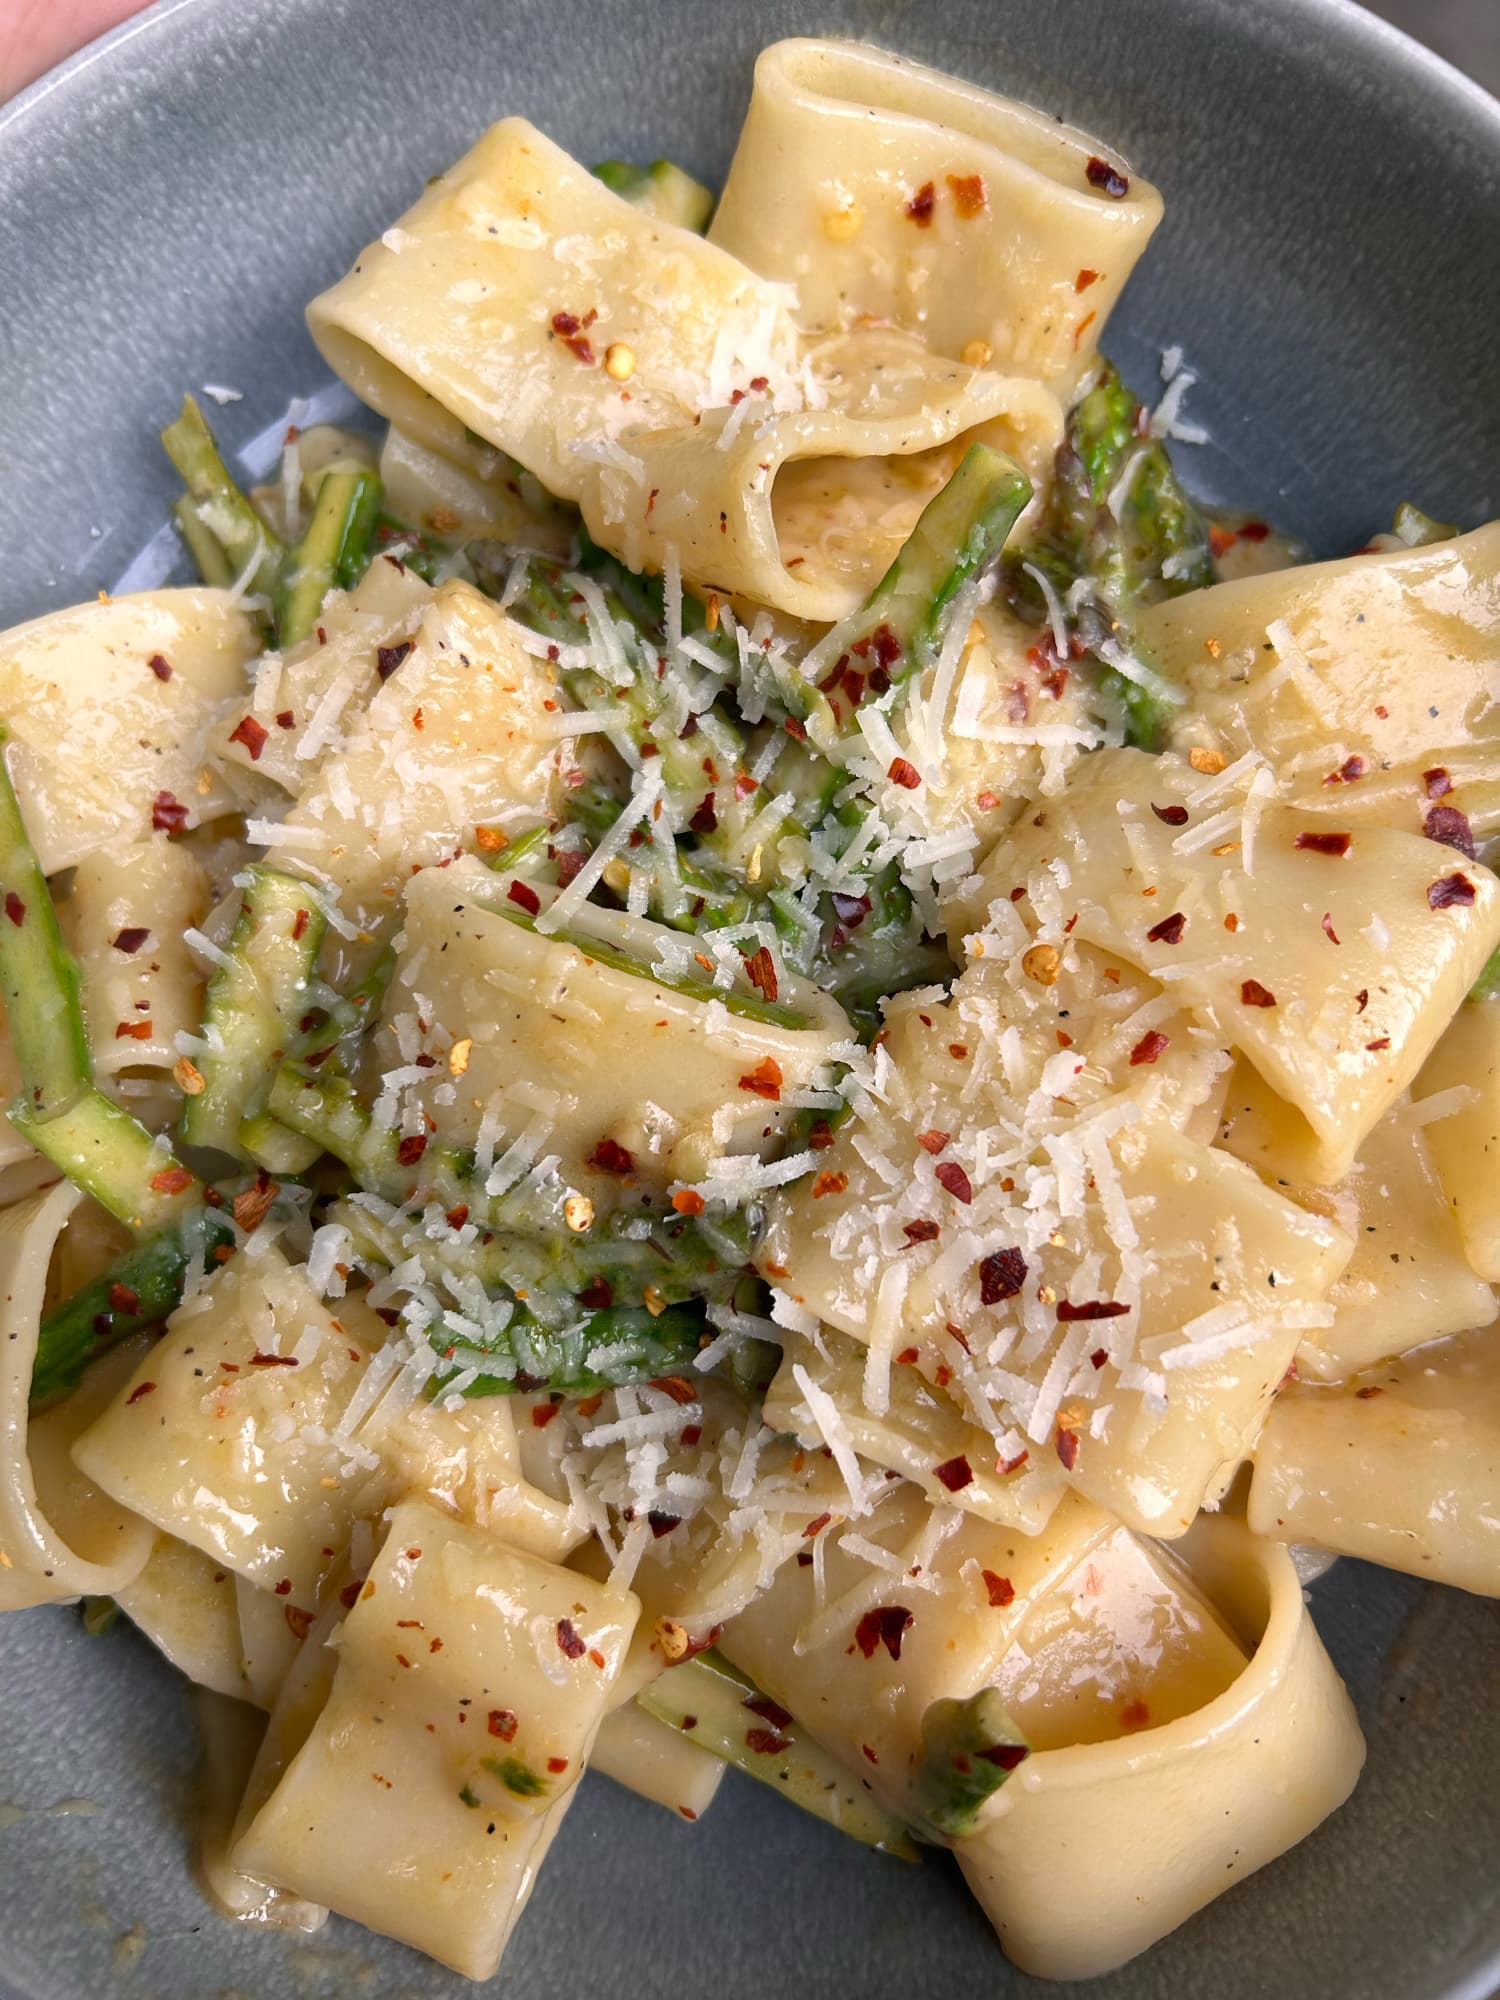 I Tried the Wildly Viral 5-Ingredient Asparagus Pasta Recipe and It Was So Good, I Made It Twice